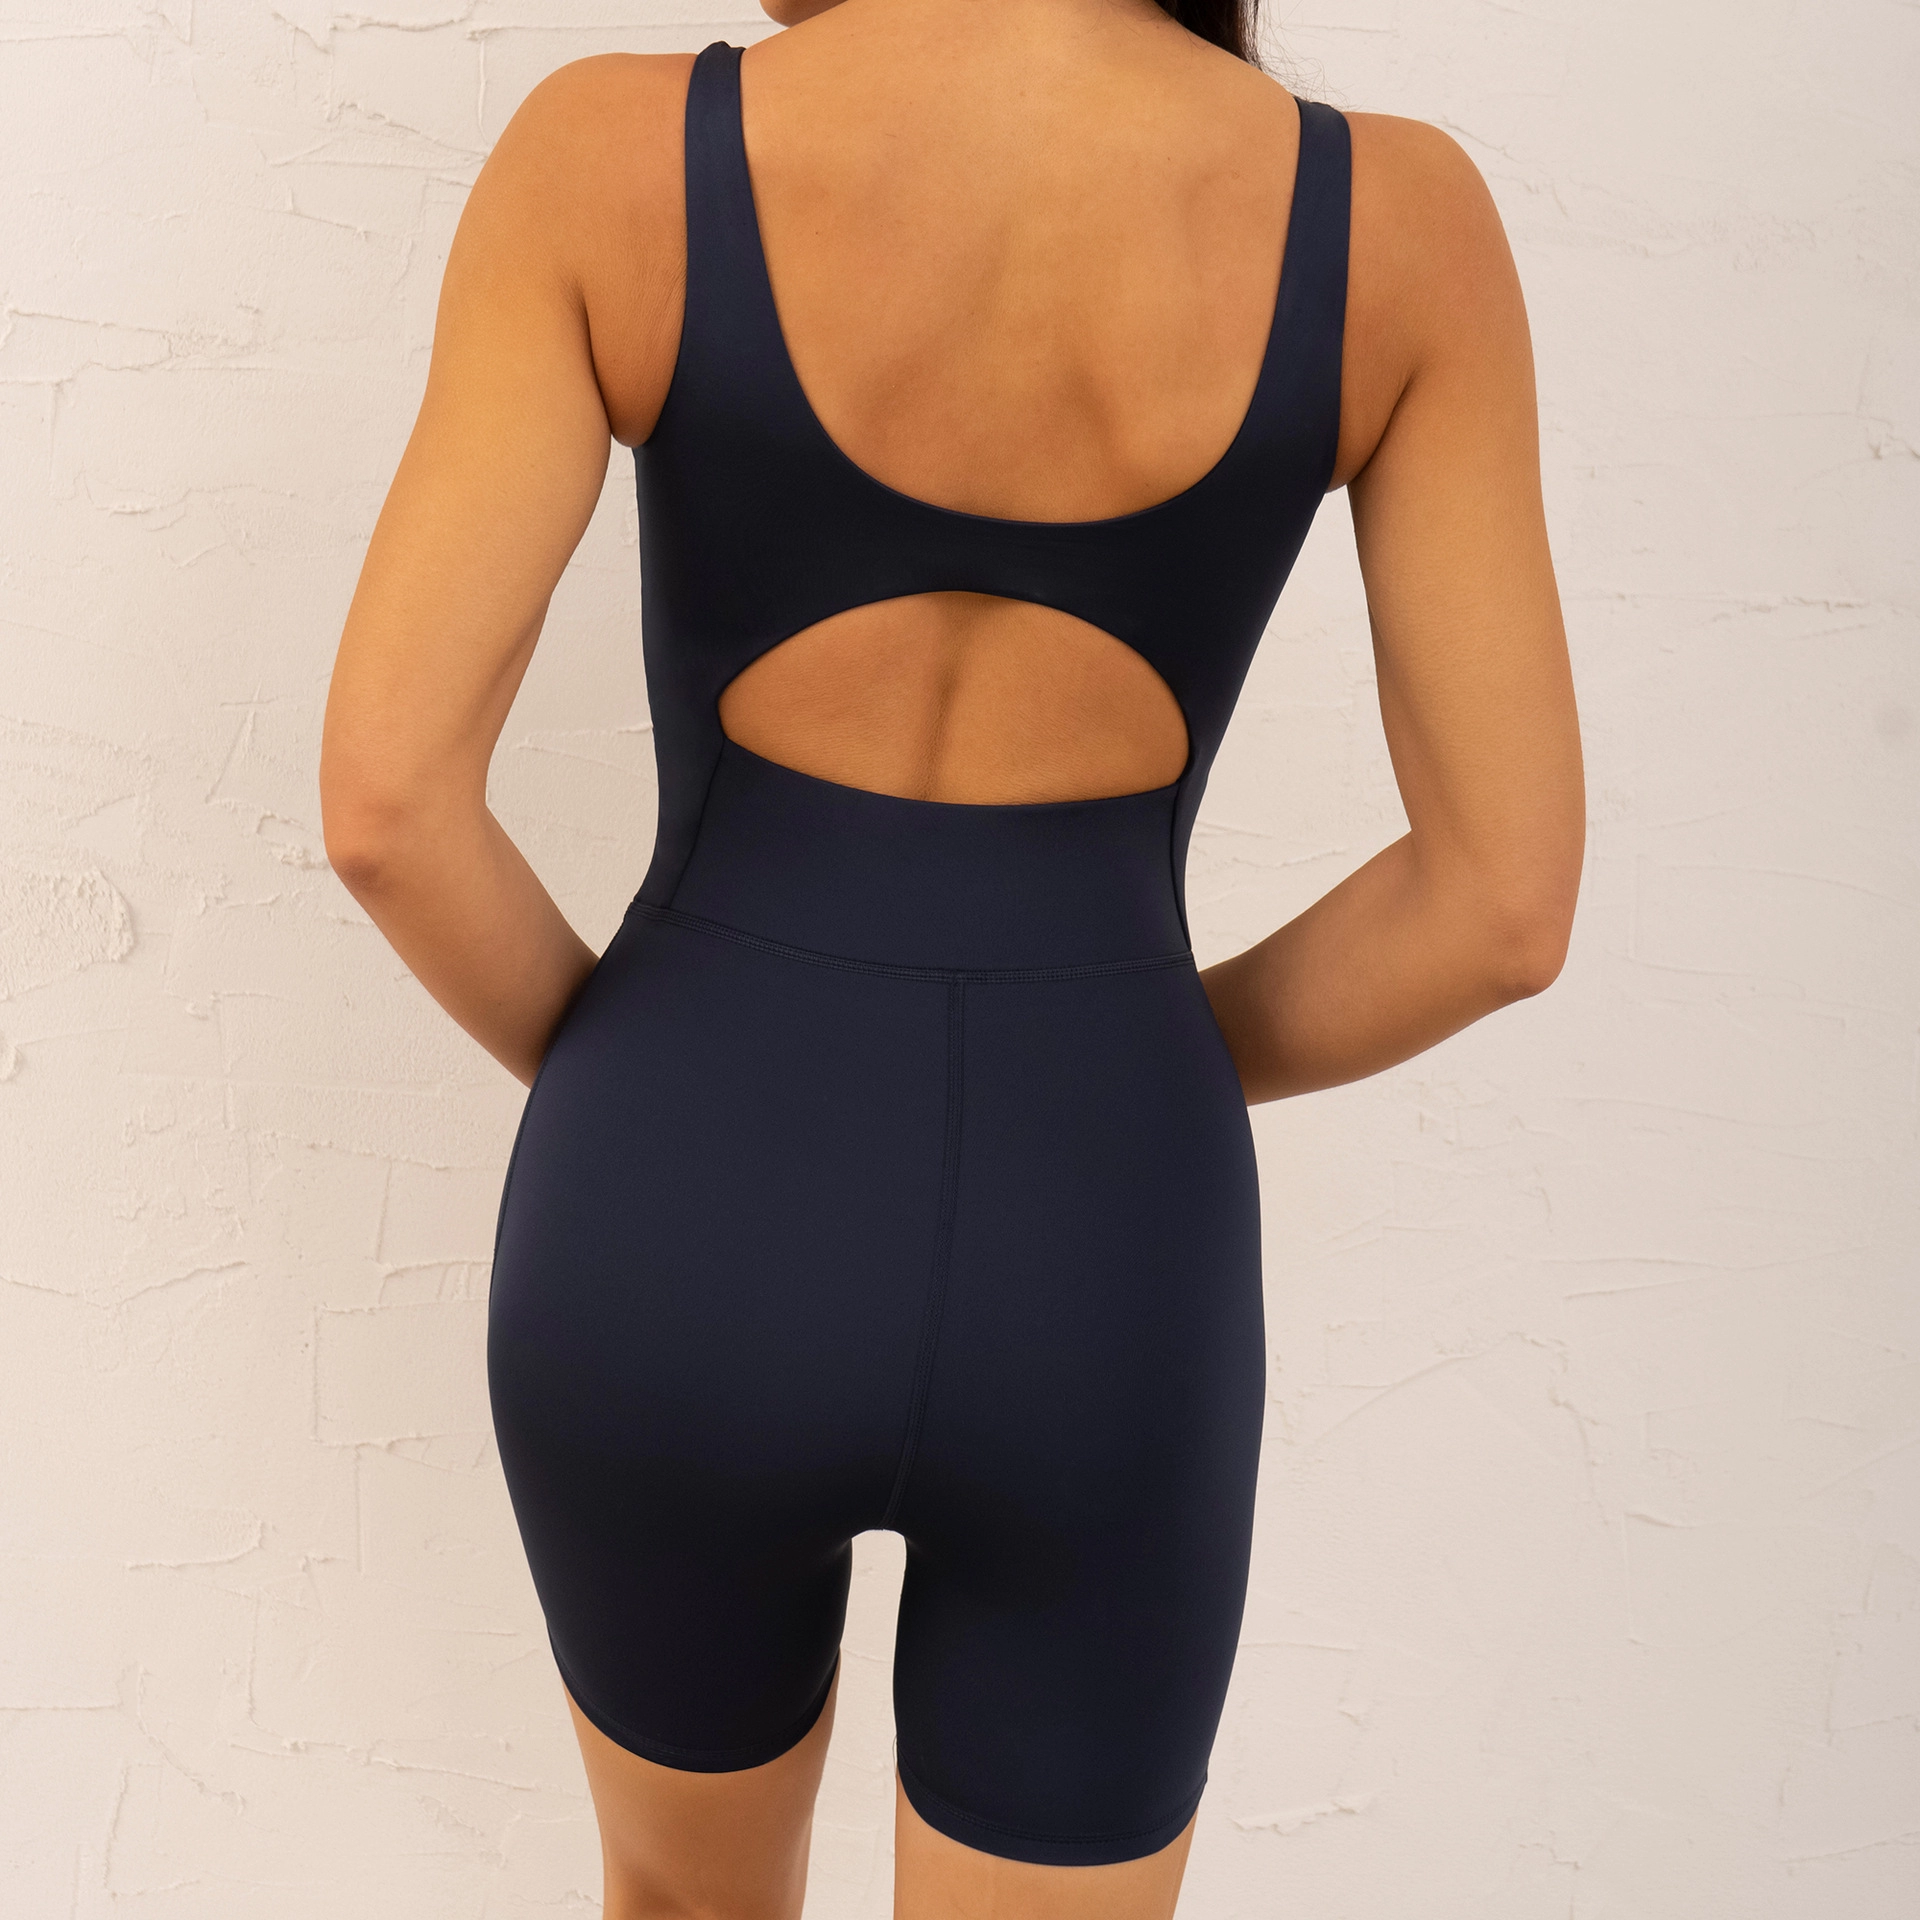 View larger image  Share High Elastic Custom Logo Sexy Hollow Out Gym Workout Fitness One Piece Yoga Jumpsuit For Women 2023